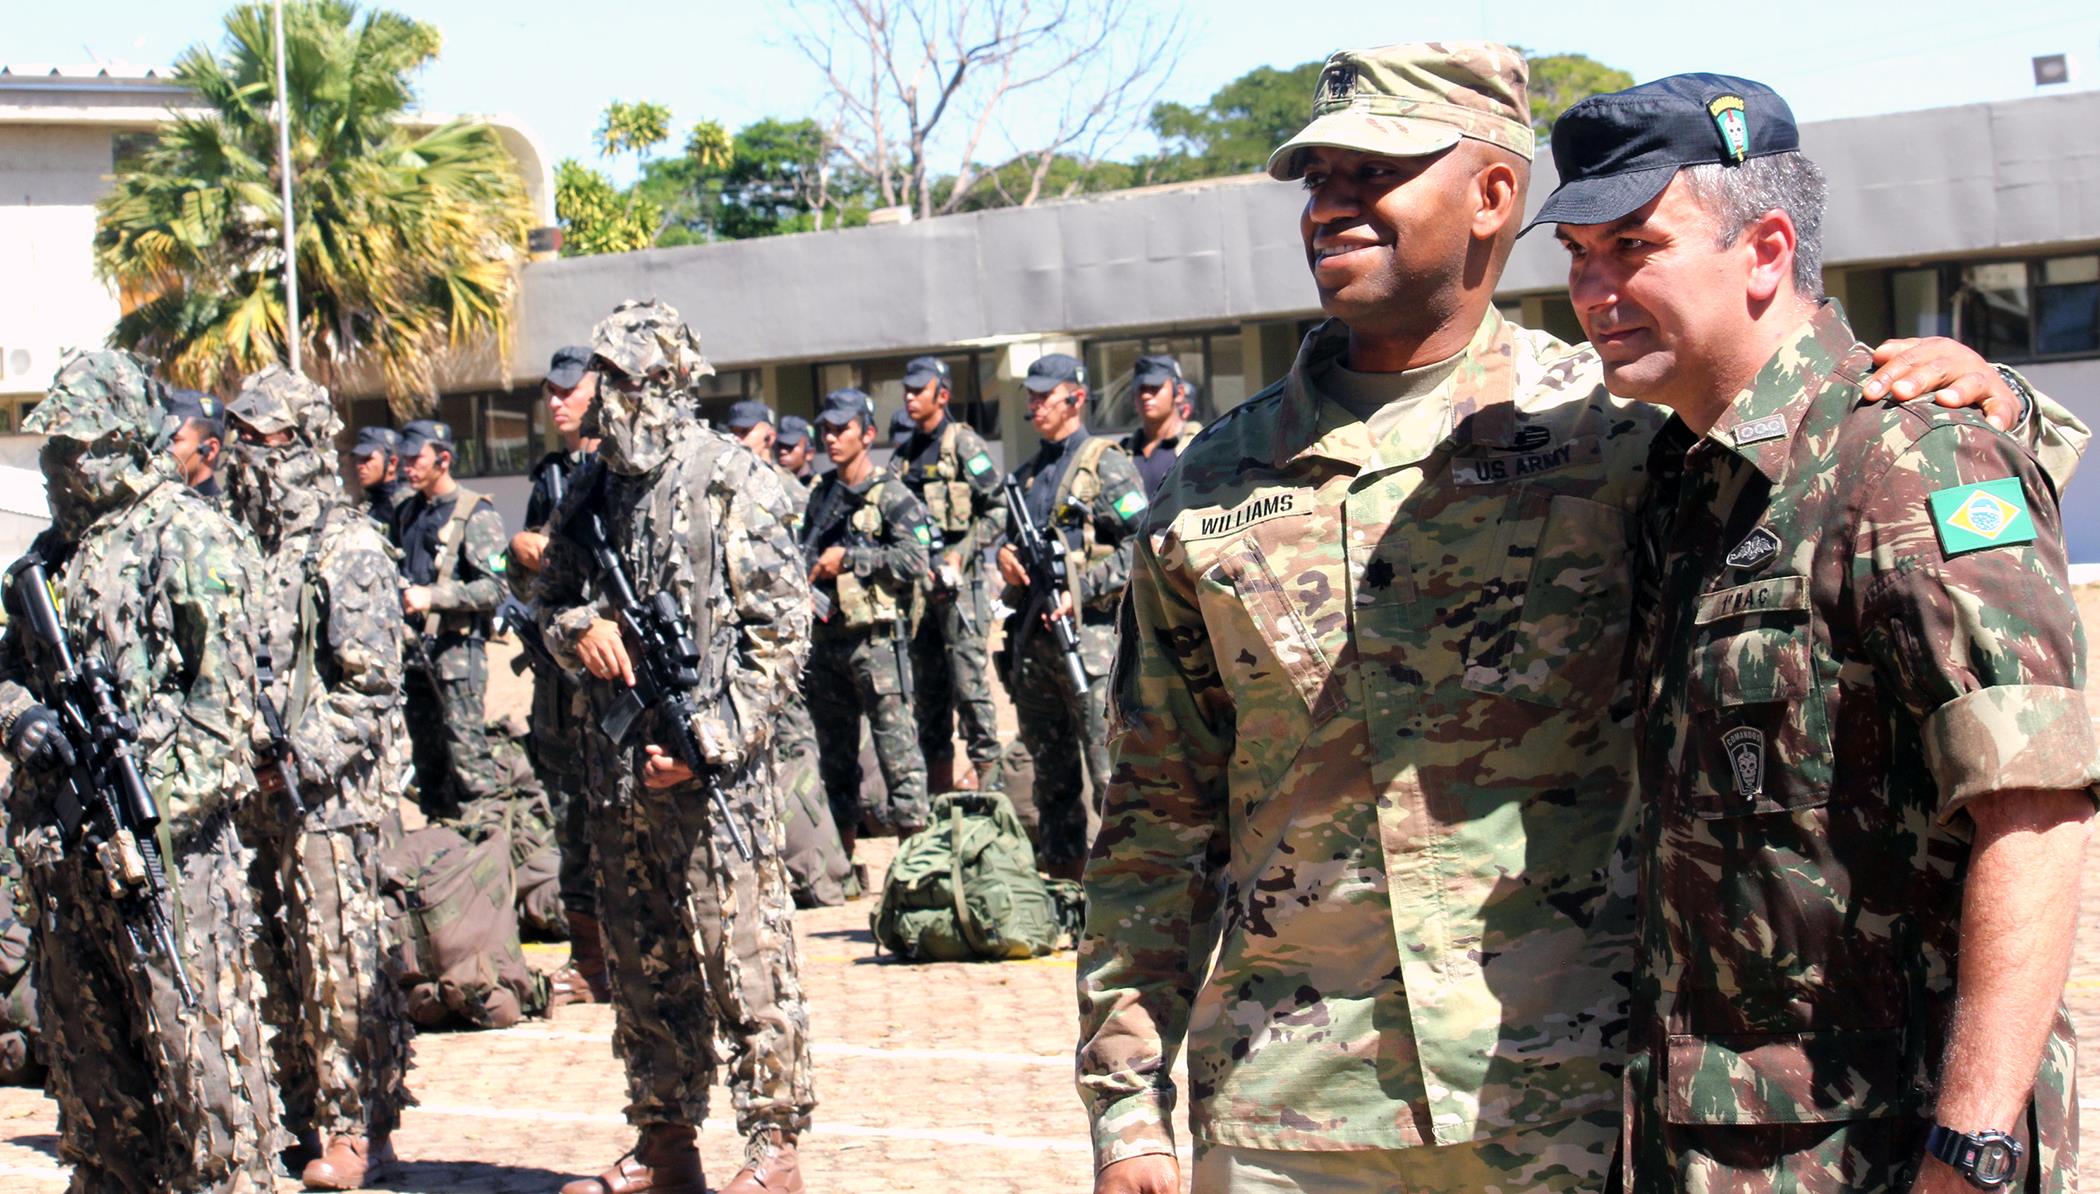 U.S. Army to conduct military training in Brazil in November